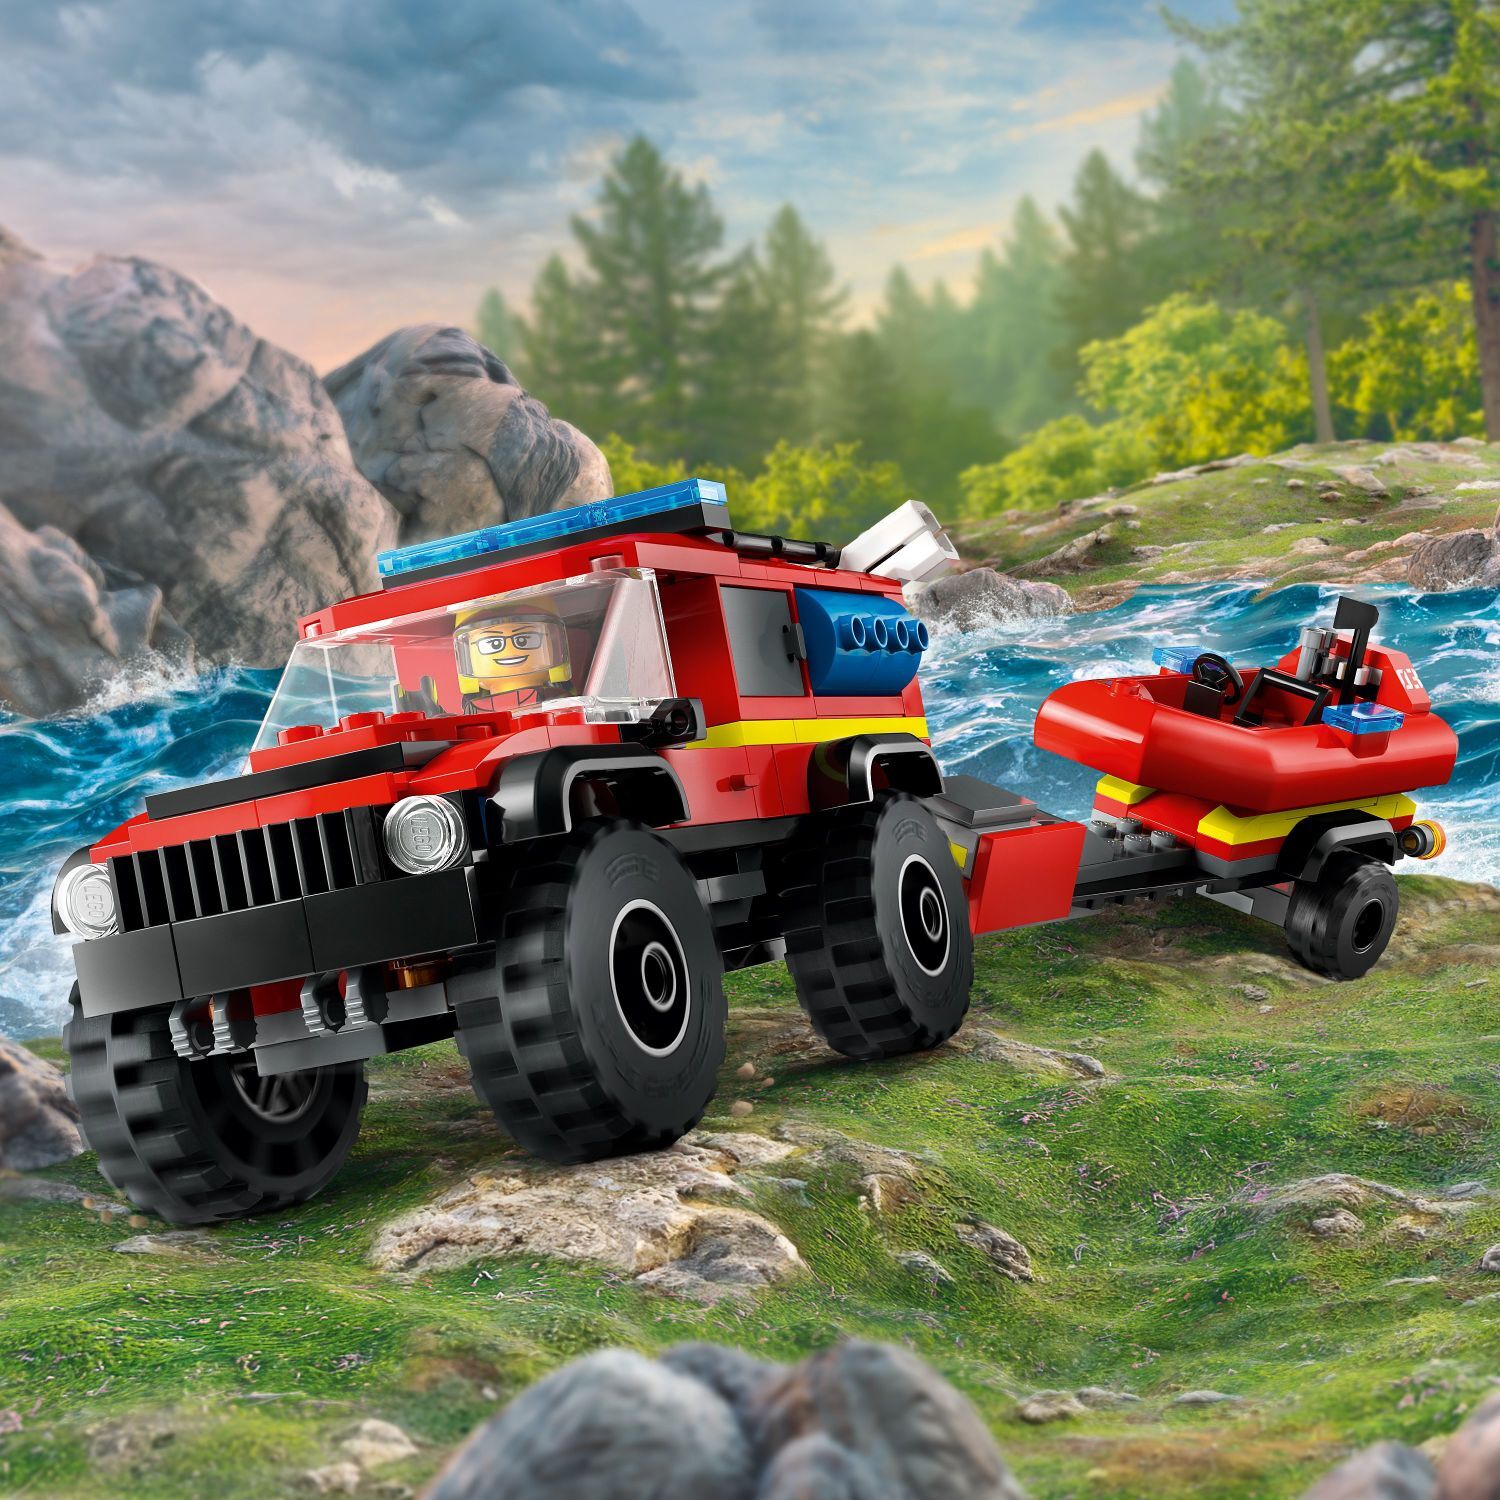 LEGO City Fire: 4x4 Fire Truck with Rescue Boat